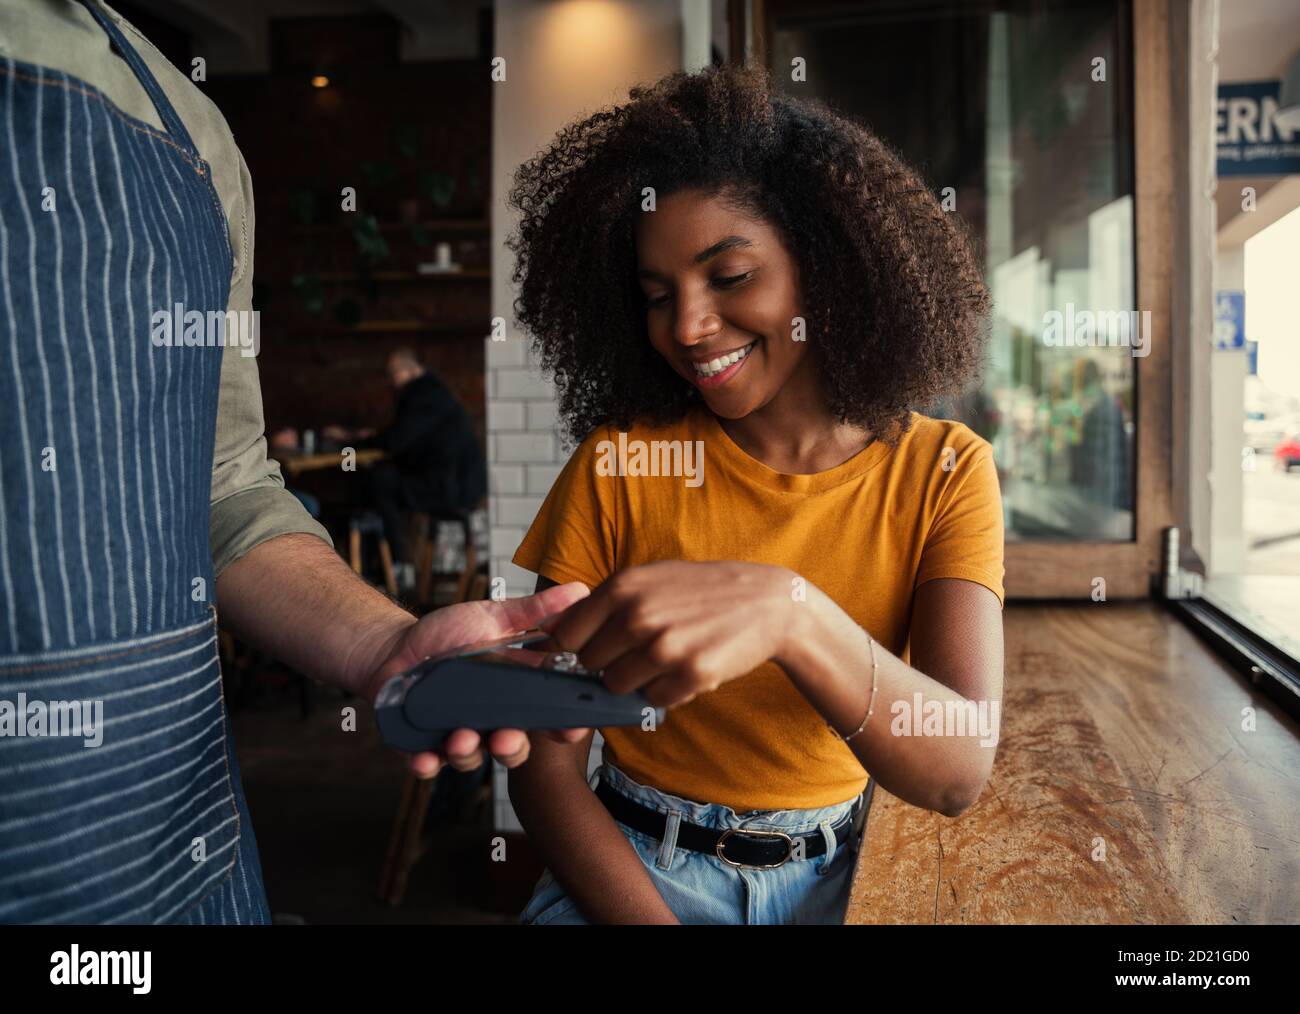 Smiling mixed race woman with afro happily paying for coffee at coffee shop. Stock Photo